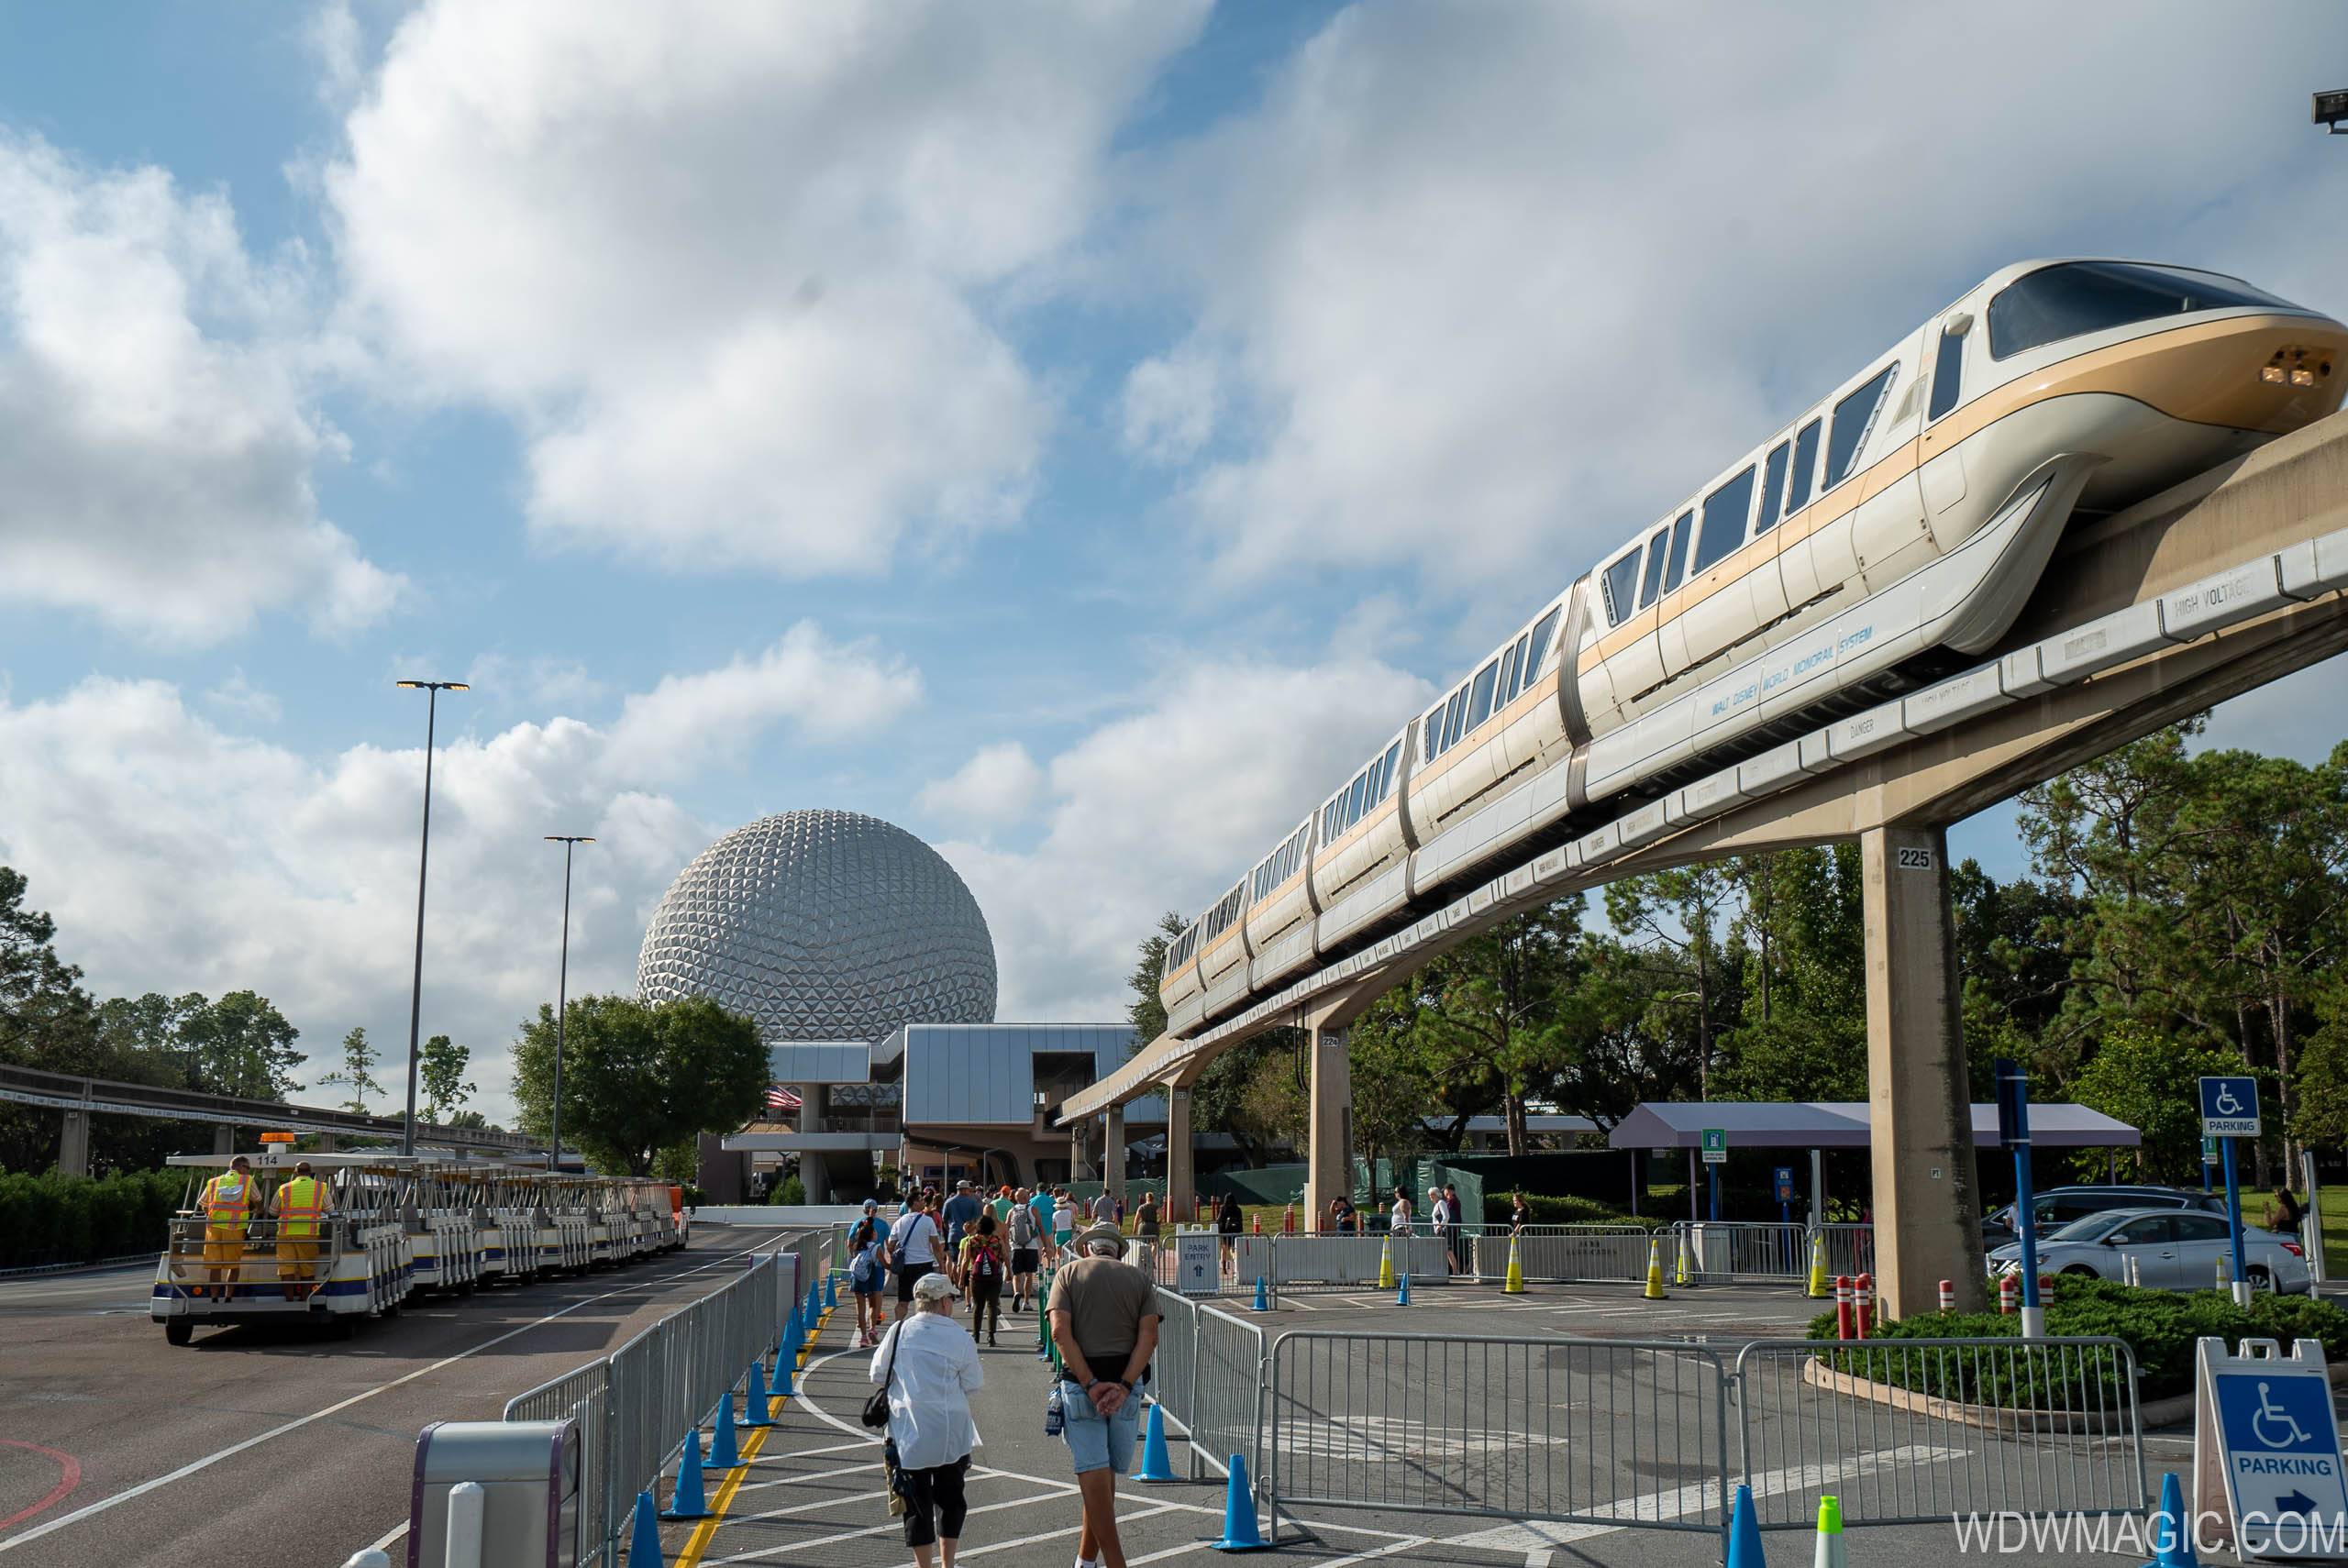 PHOTOS - First phase of Epcot's new entrance area now open